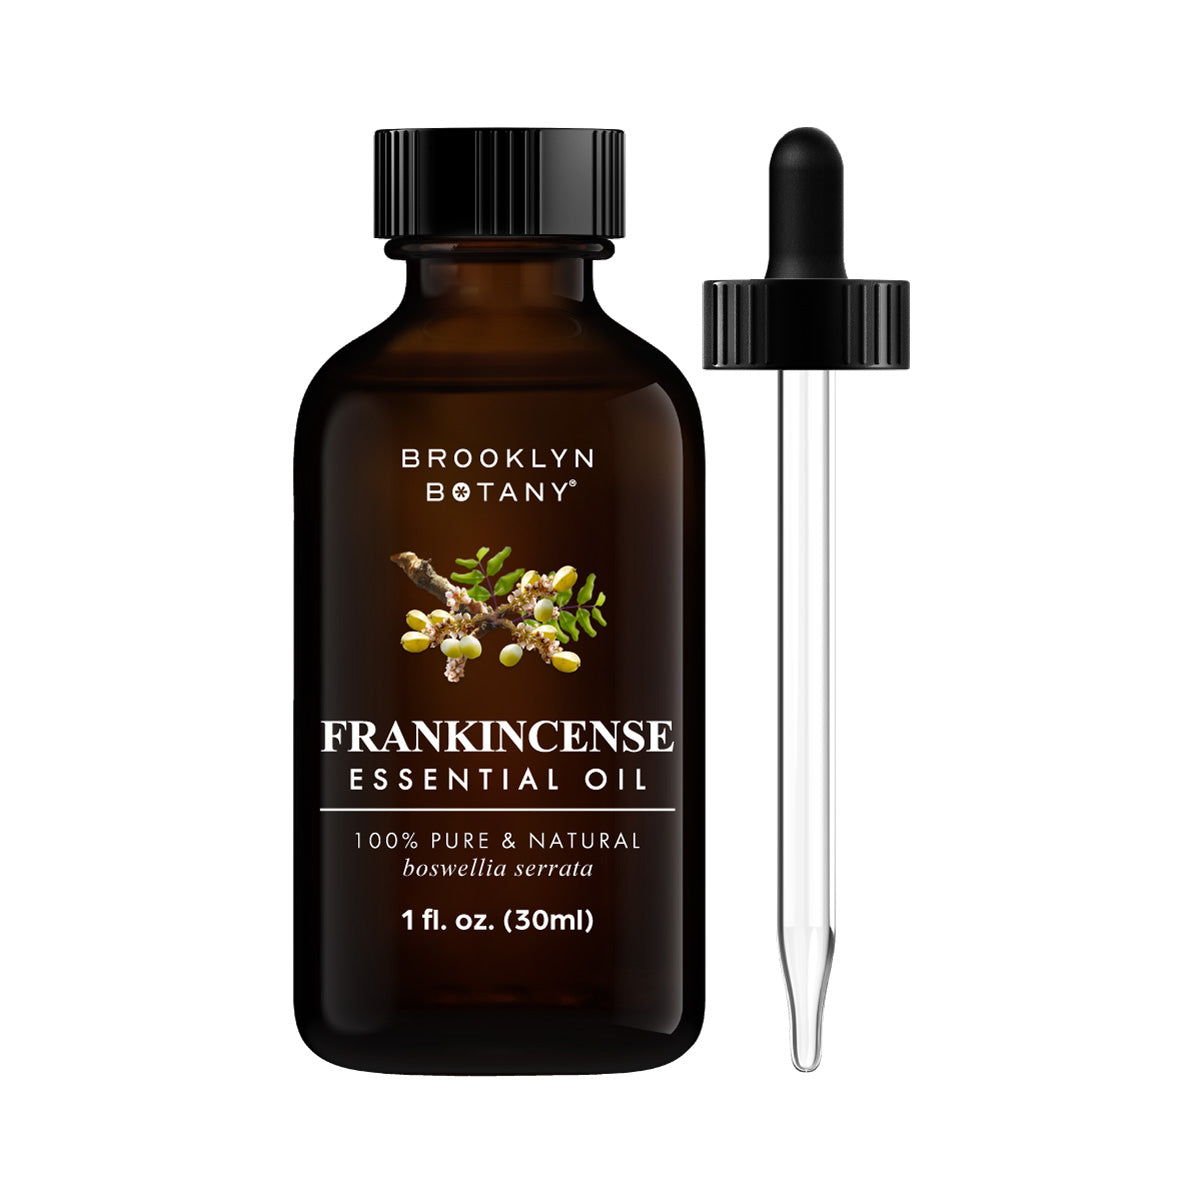 Shopify-BB-30ml-Frankincense-Essential-Oil-Main-Image-with-Sides.jpg